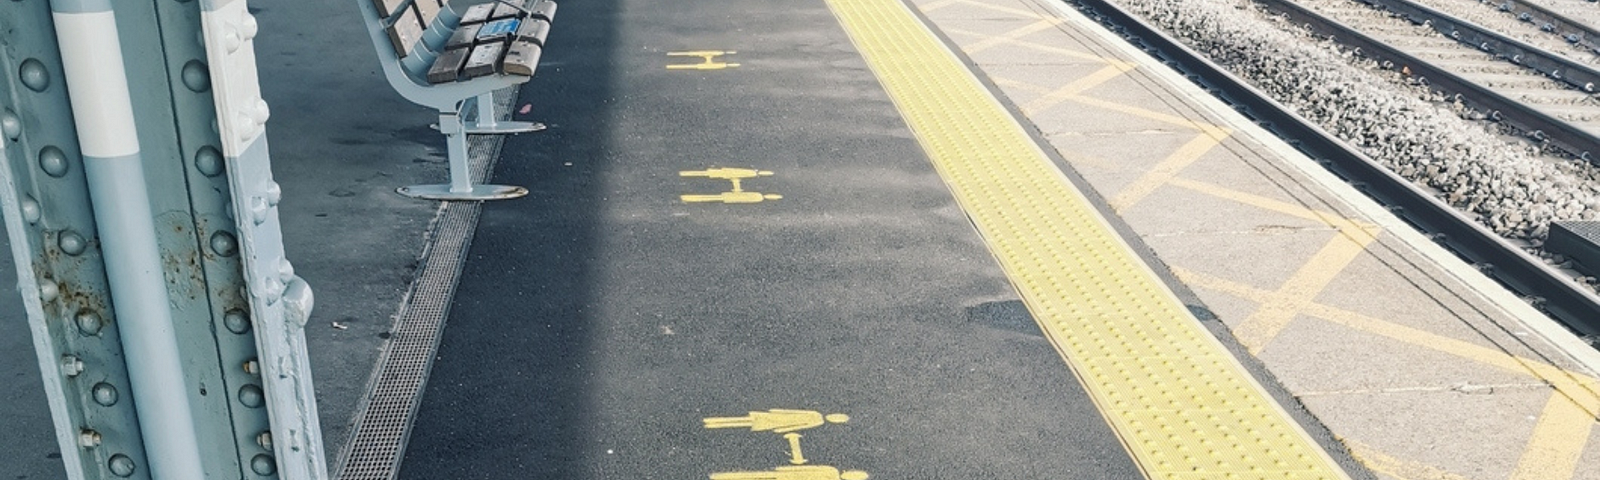 Image of a train platform, showing yellow paint and encouraging social distancing.